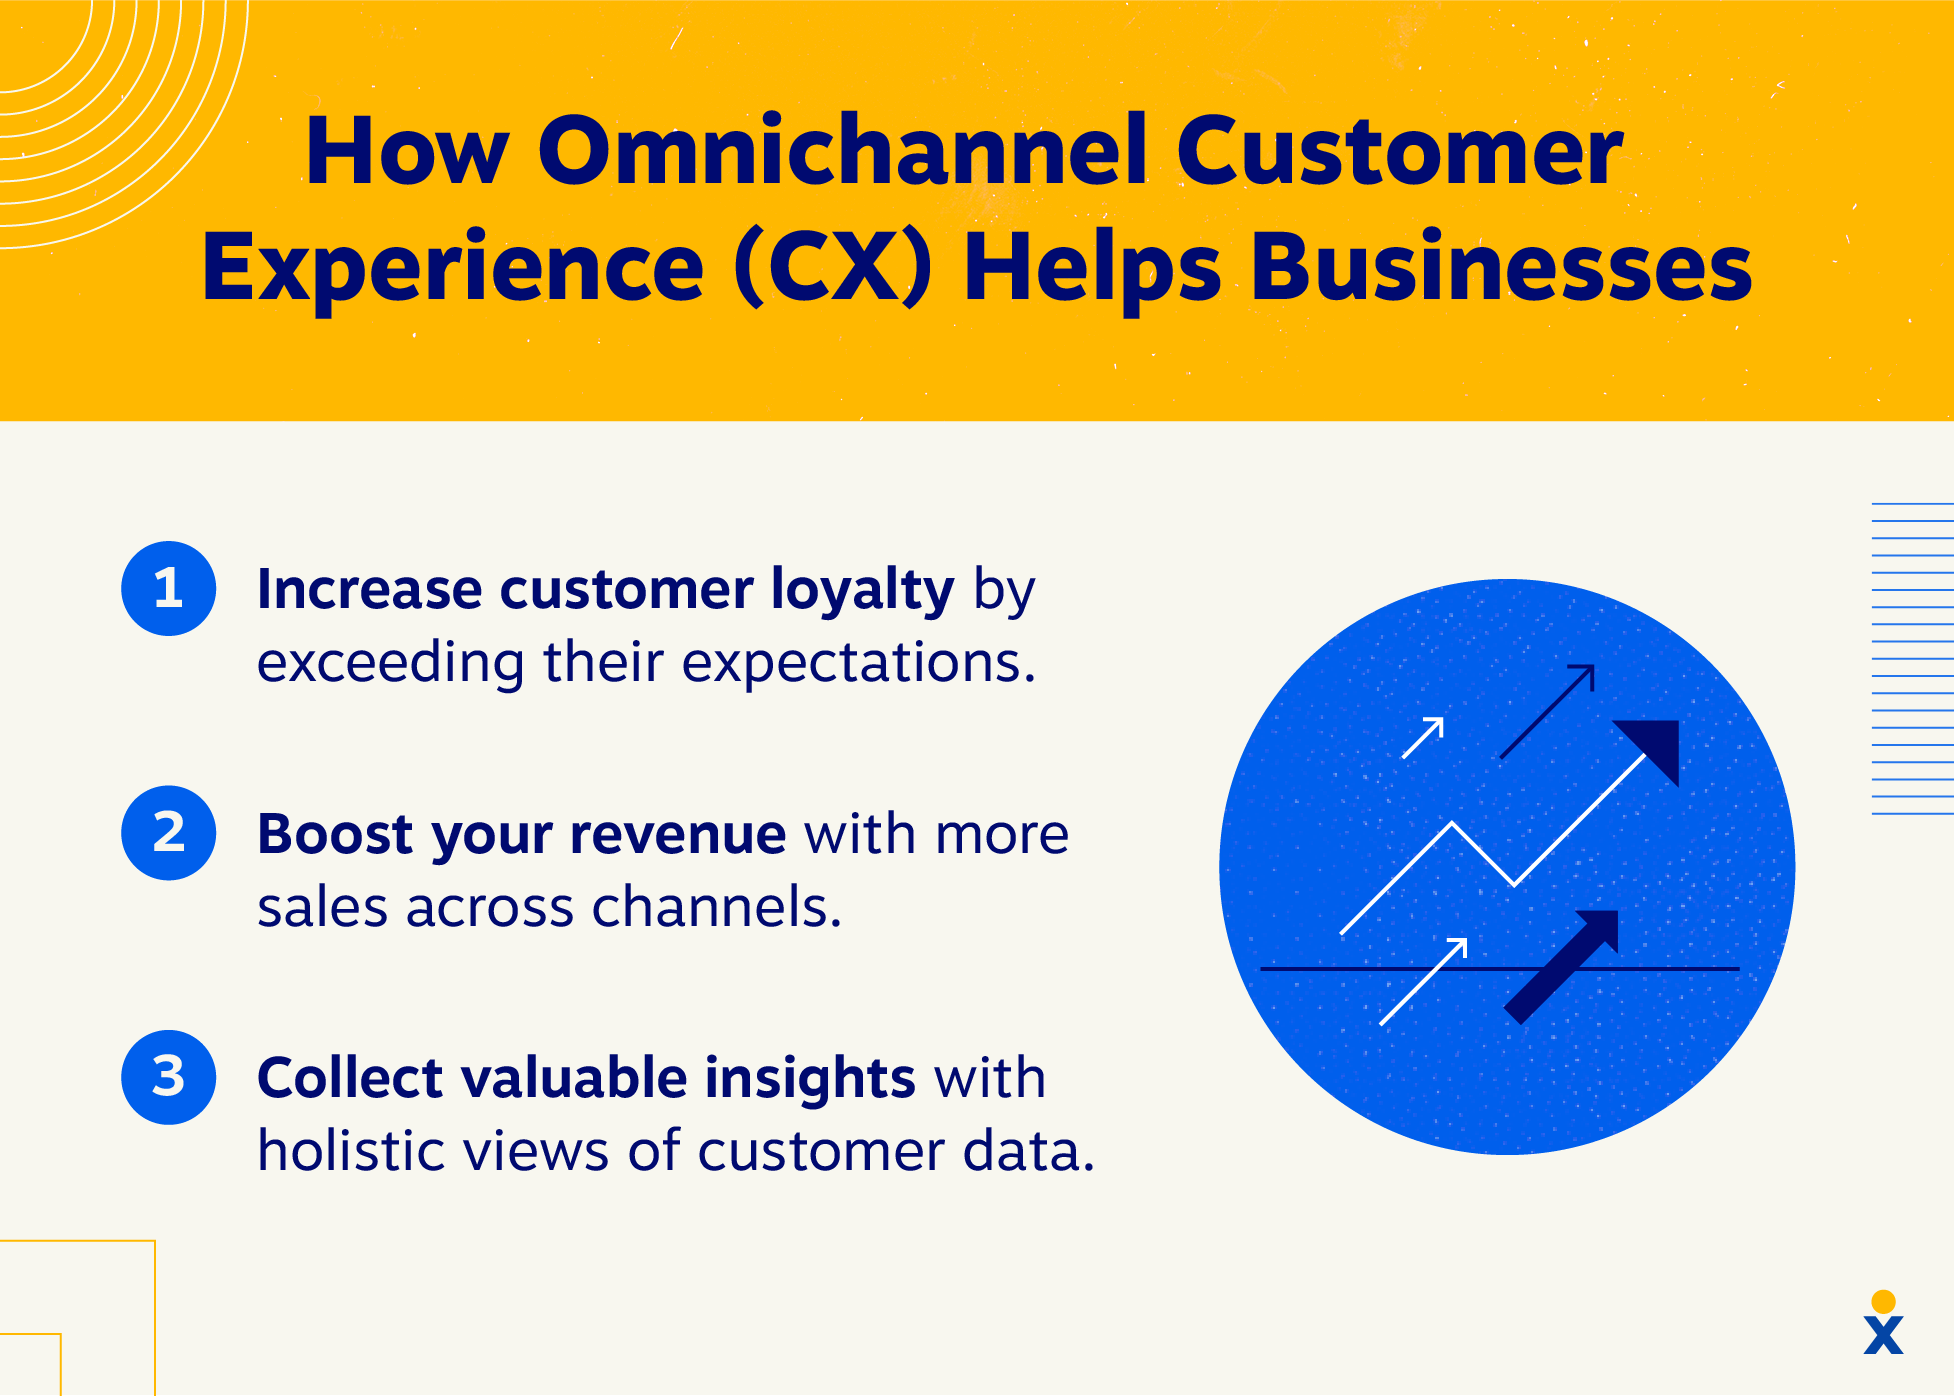 How omnichannel CX helps businesses